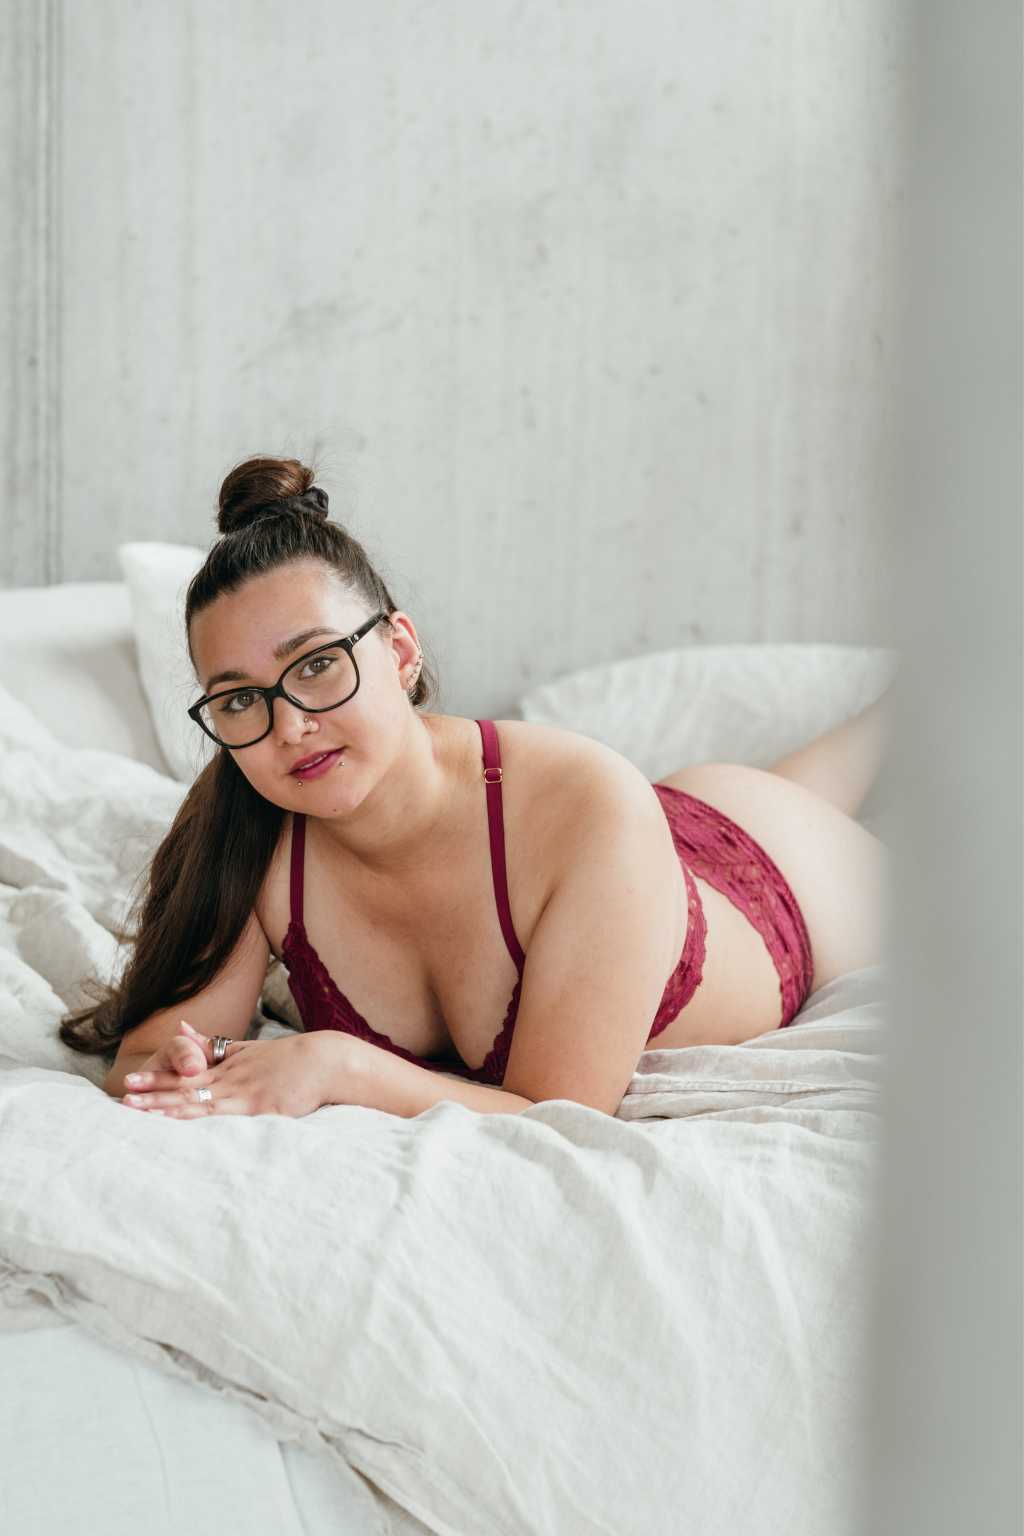 Self-love boudoir shoot - woman in bed wears red underwear and matching lipstick